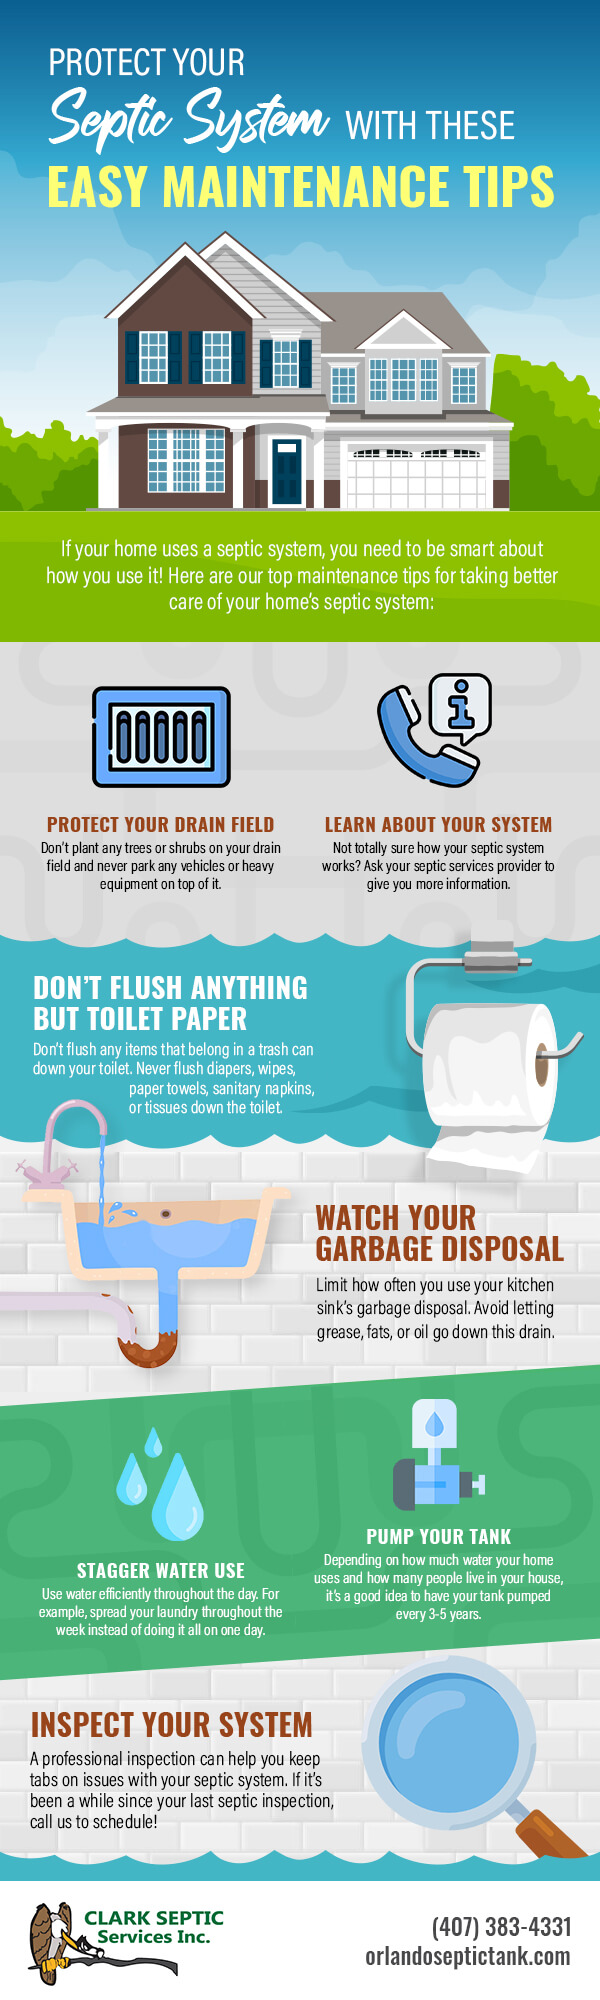 Protect Your Septic System with These Easy Maintenance Tip